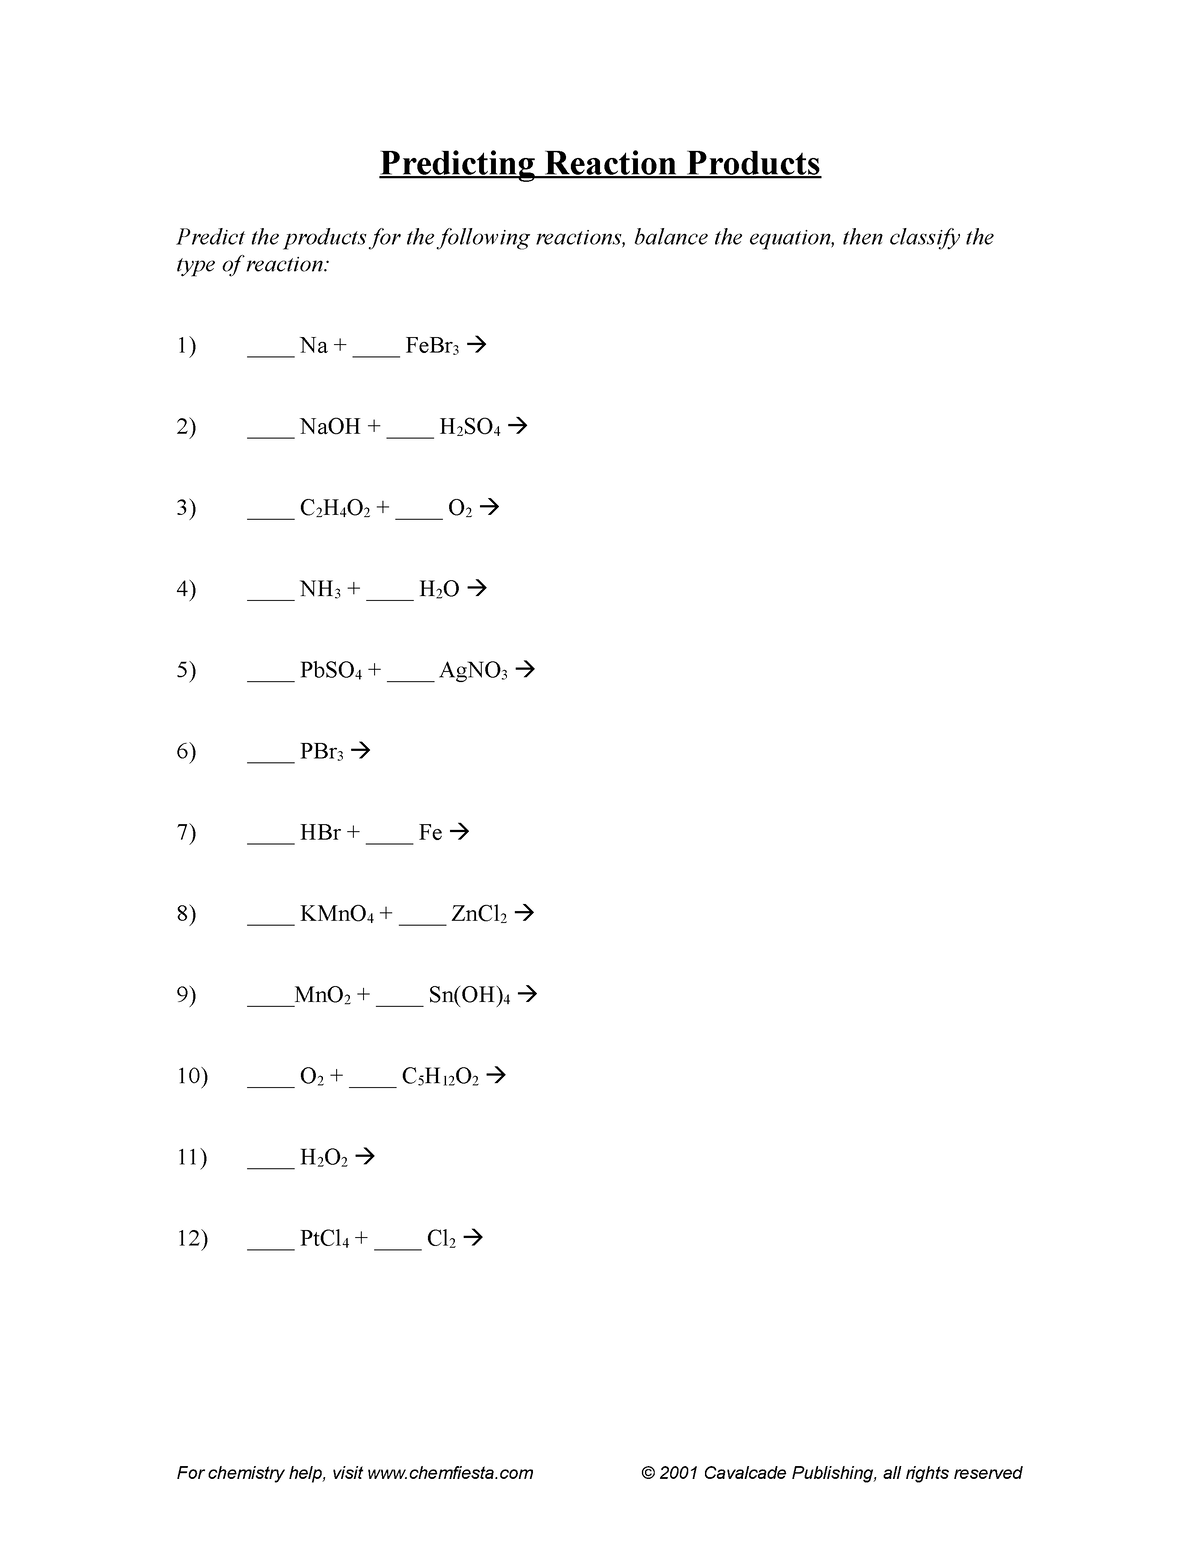 Predicting Reaction Products Worksheet Answer Key